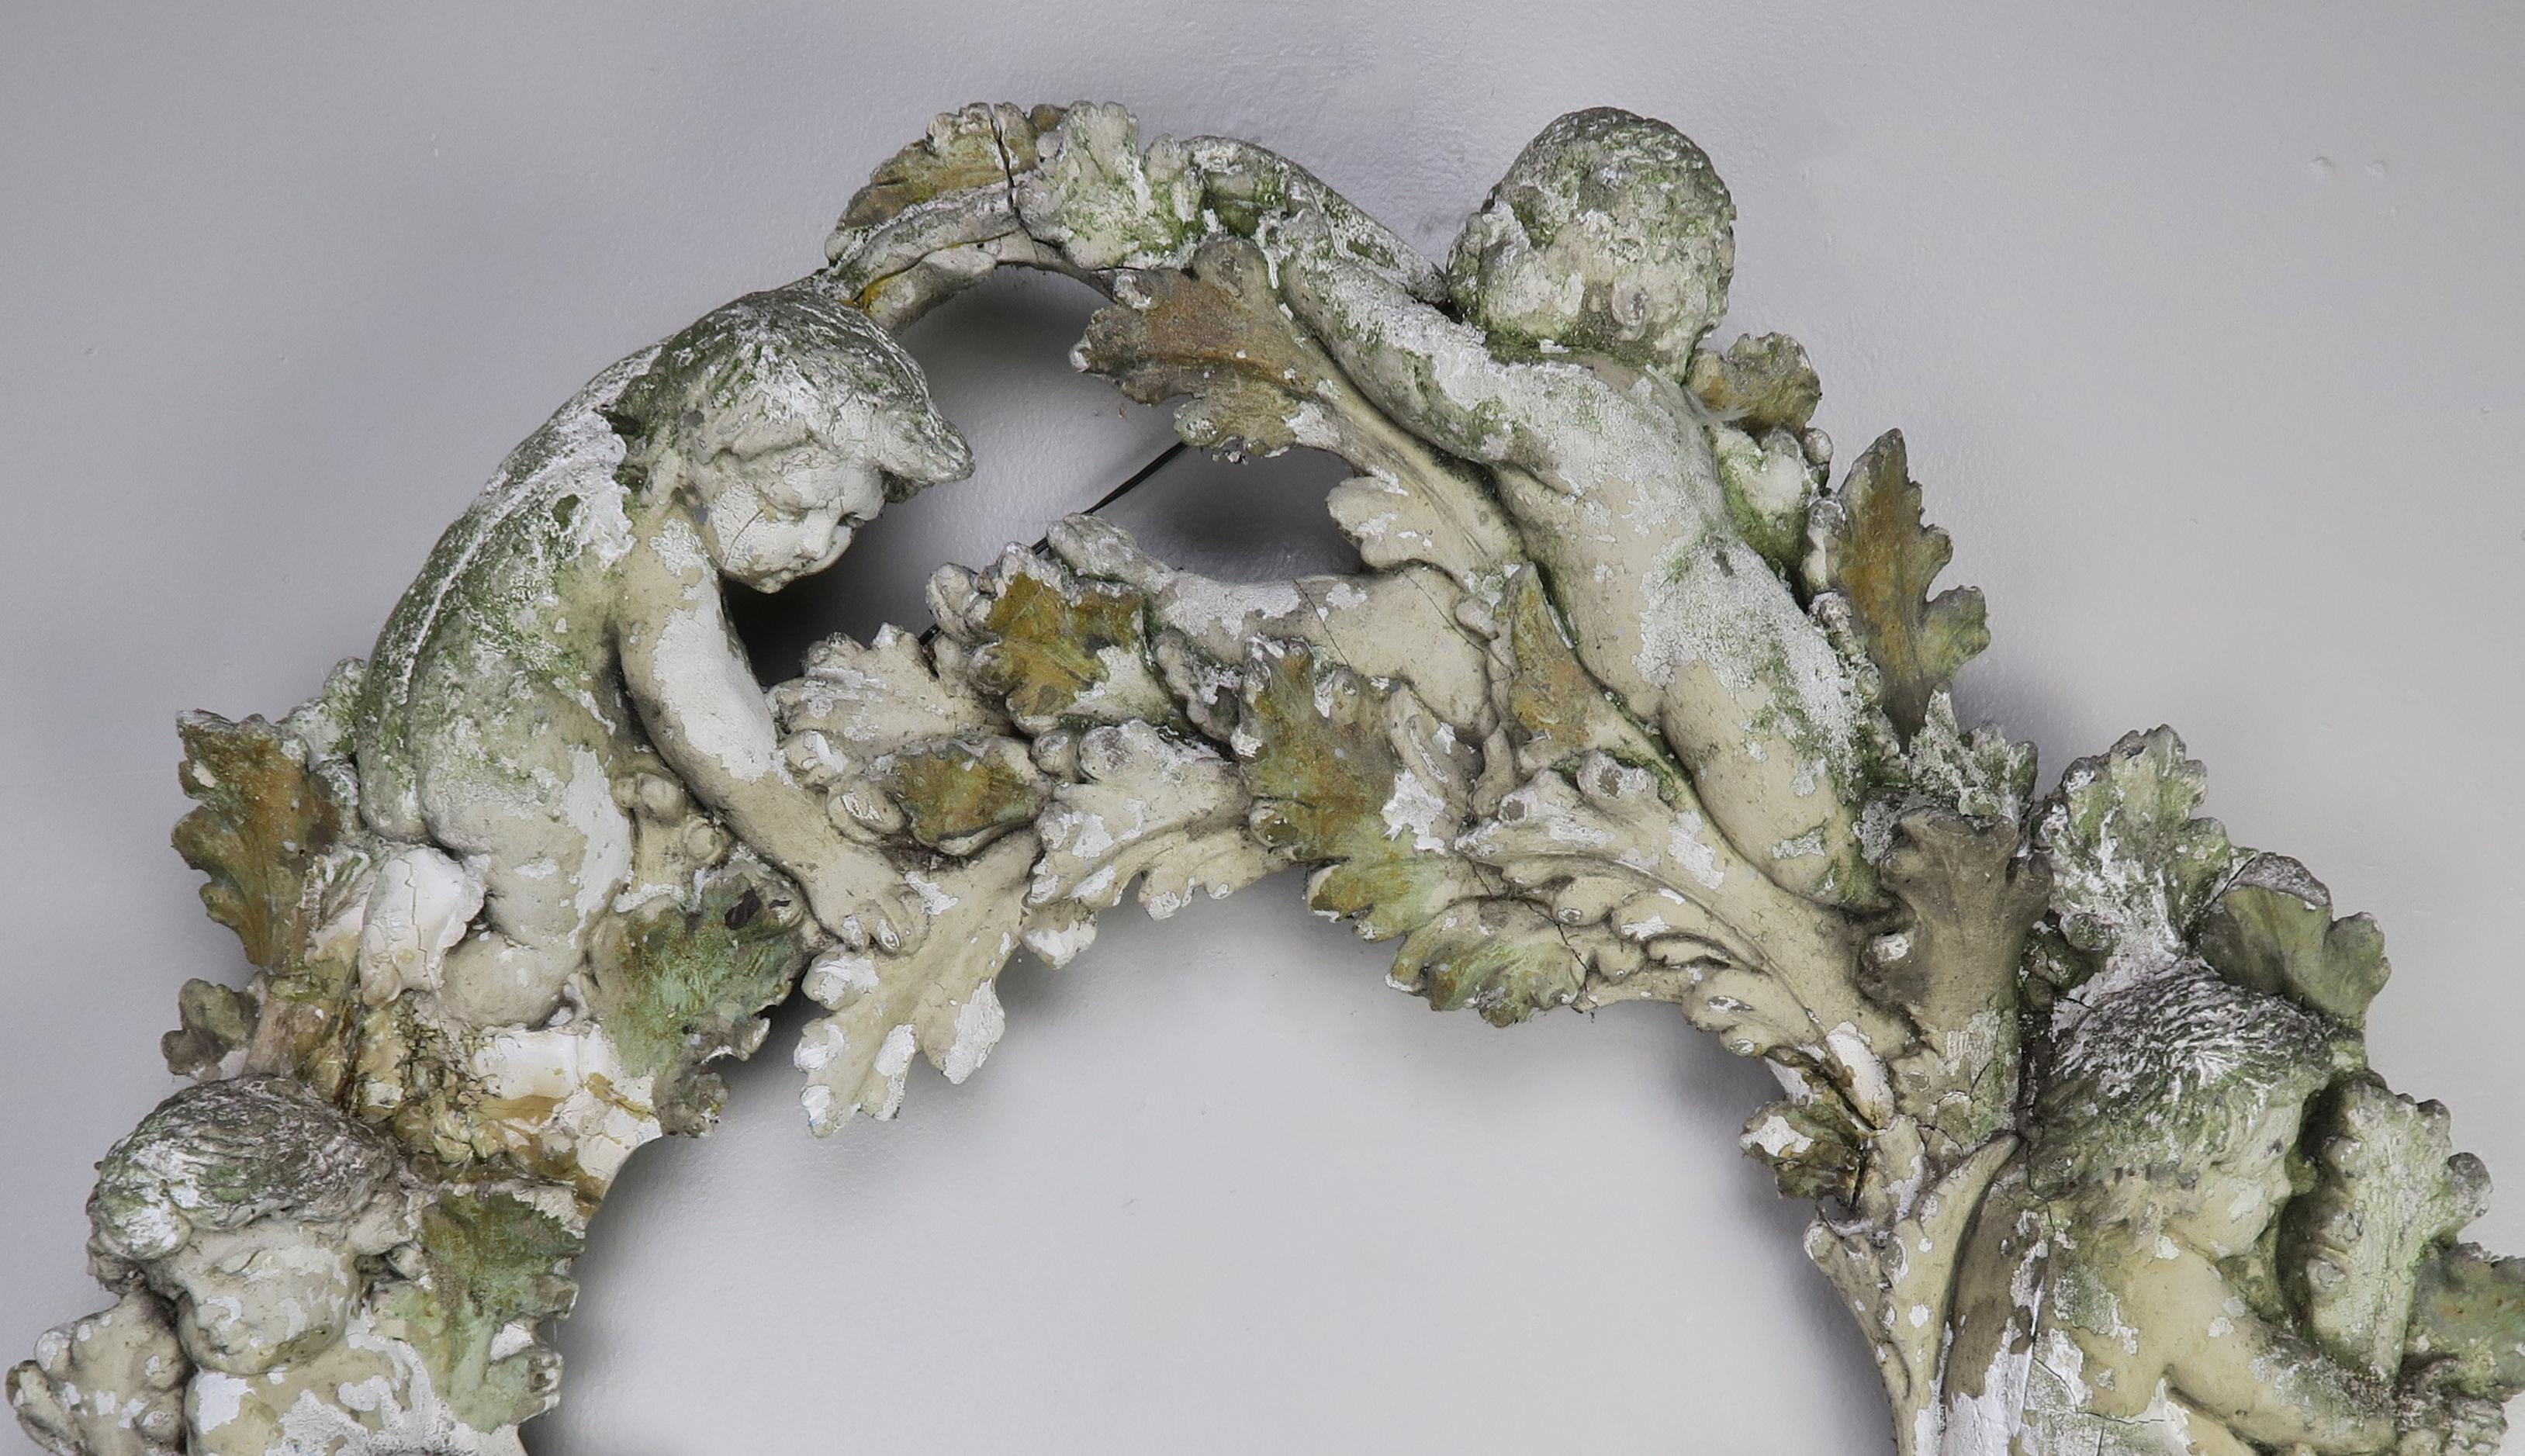 Early 20th century fragment made of chalk and gesso. The beautiful remnant of a larger piece depicts cherubs and acanthus leaves throughout. It would be beautiful on a wall as decor or it would be great in your garden or outside area.